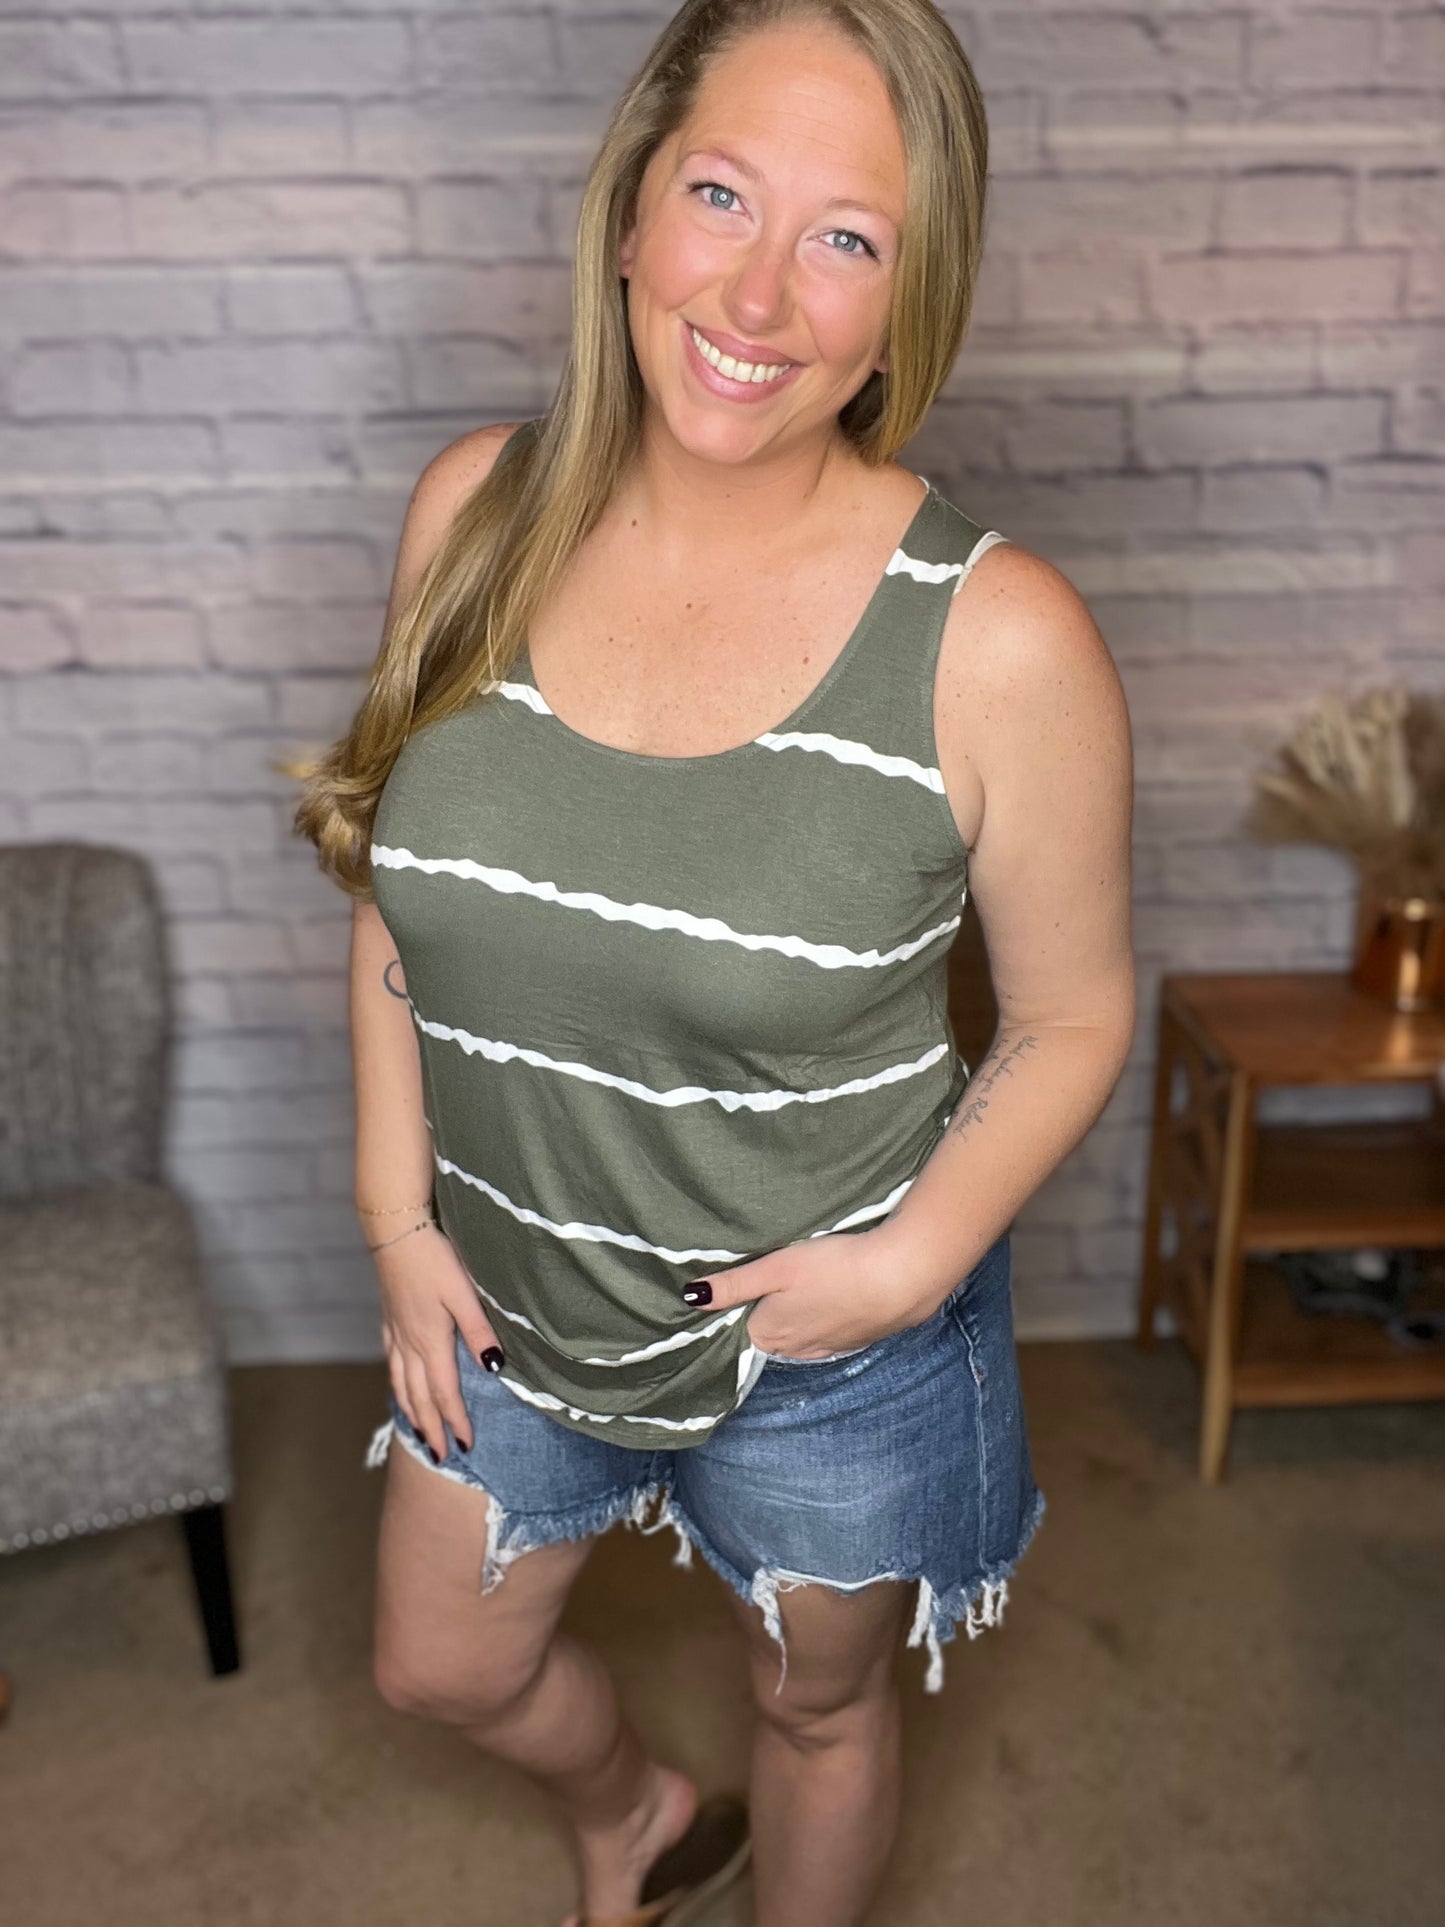 Striped Sleeveless Top - 4 Color Options!